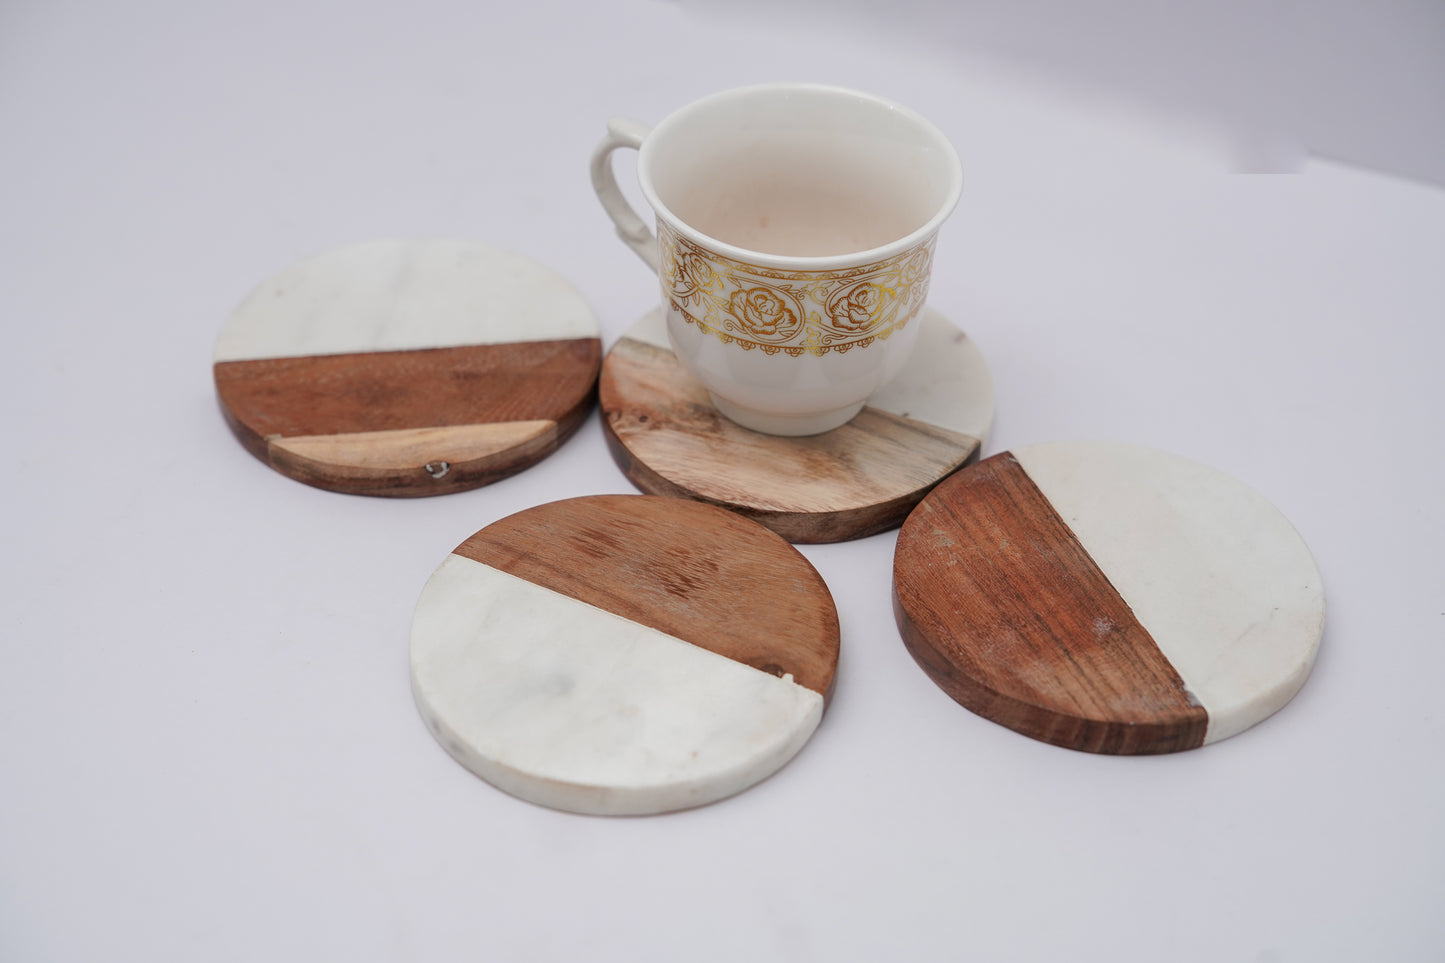 Marble and Wood Coaster Set of 4 for Tea Coffee Cocktail Handmade Marble Coaster for Hot & Cold Drinks Coaster for Dining Table Home and Office Round- White